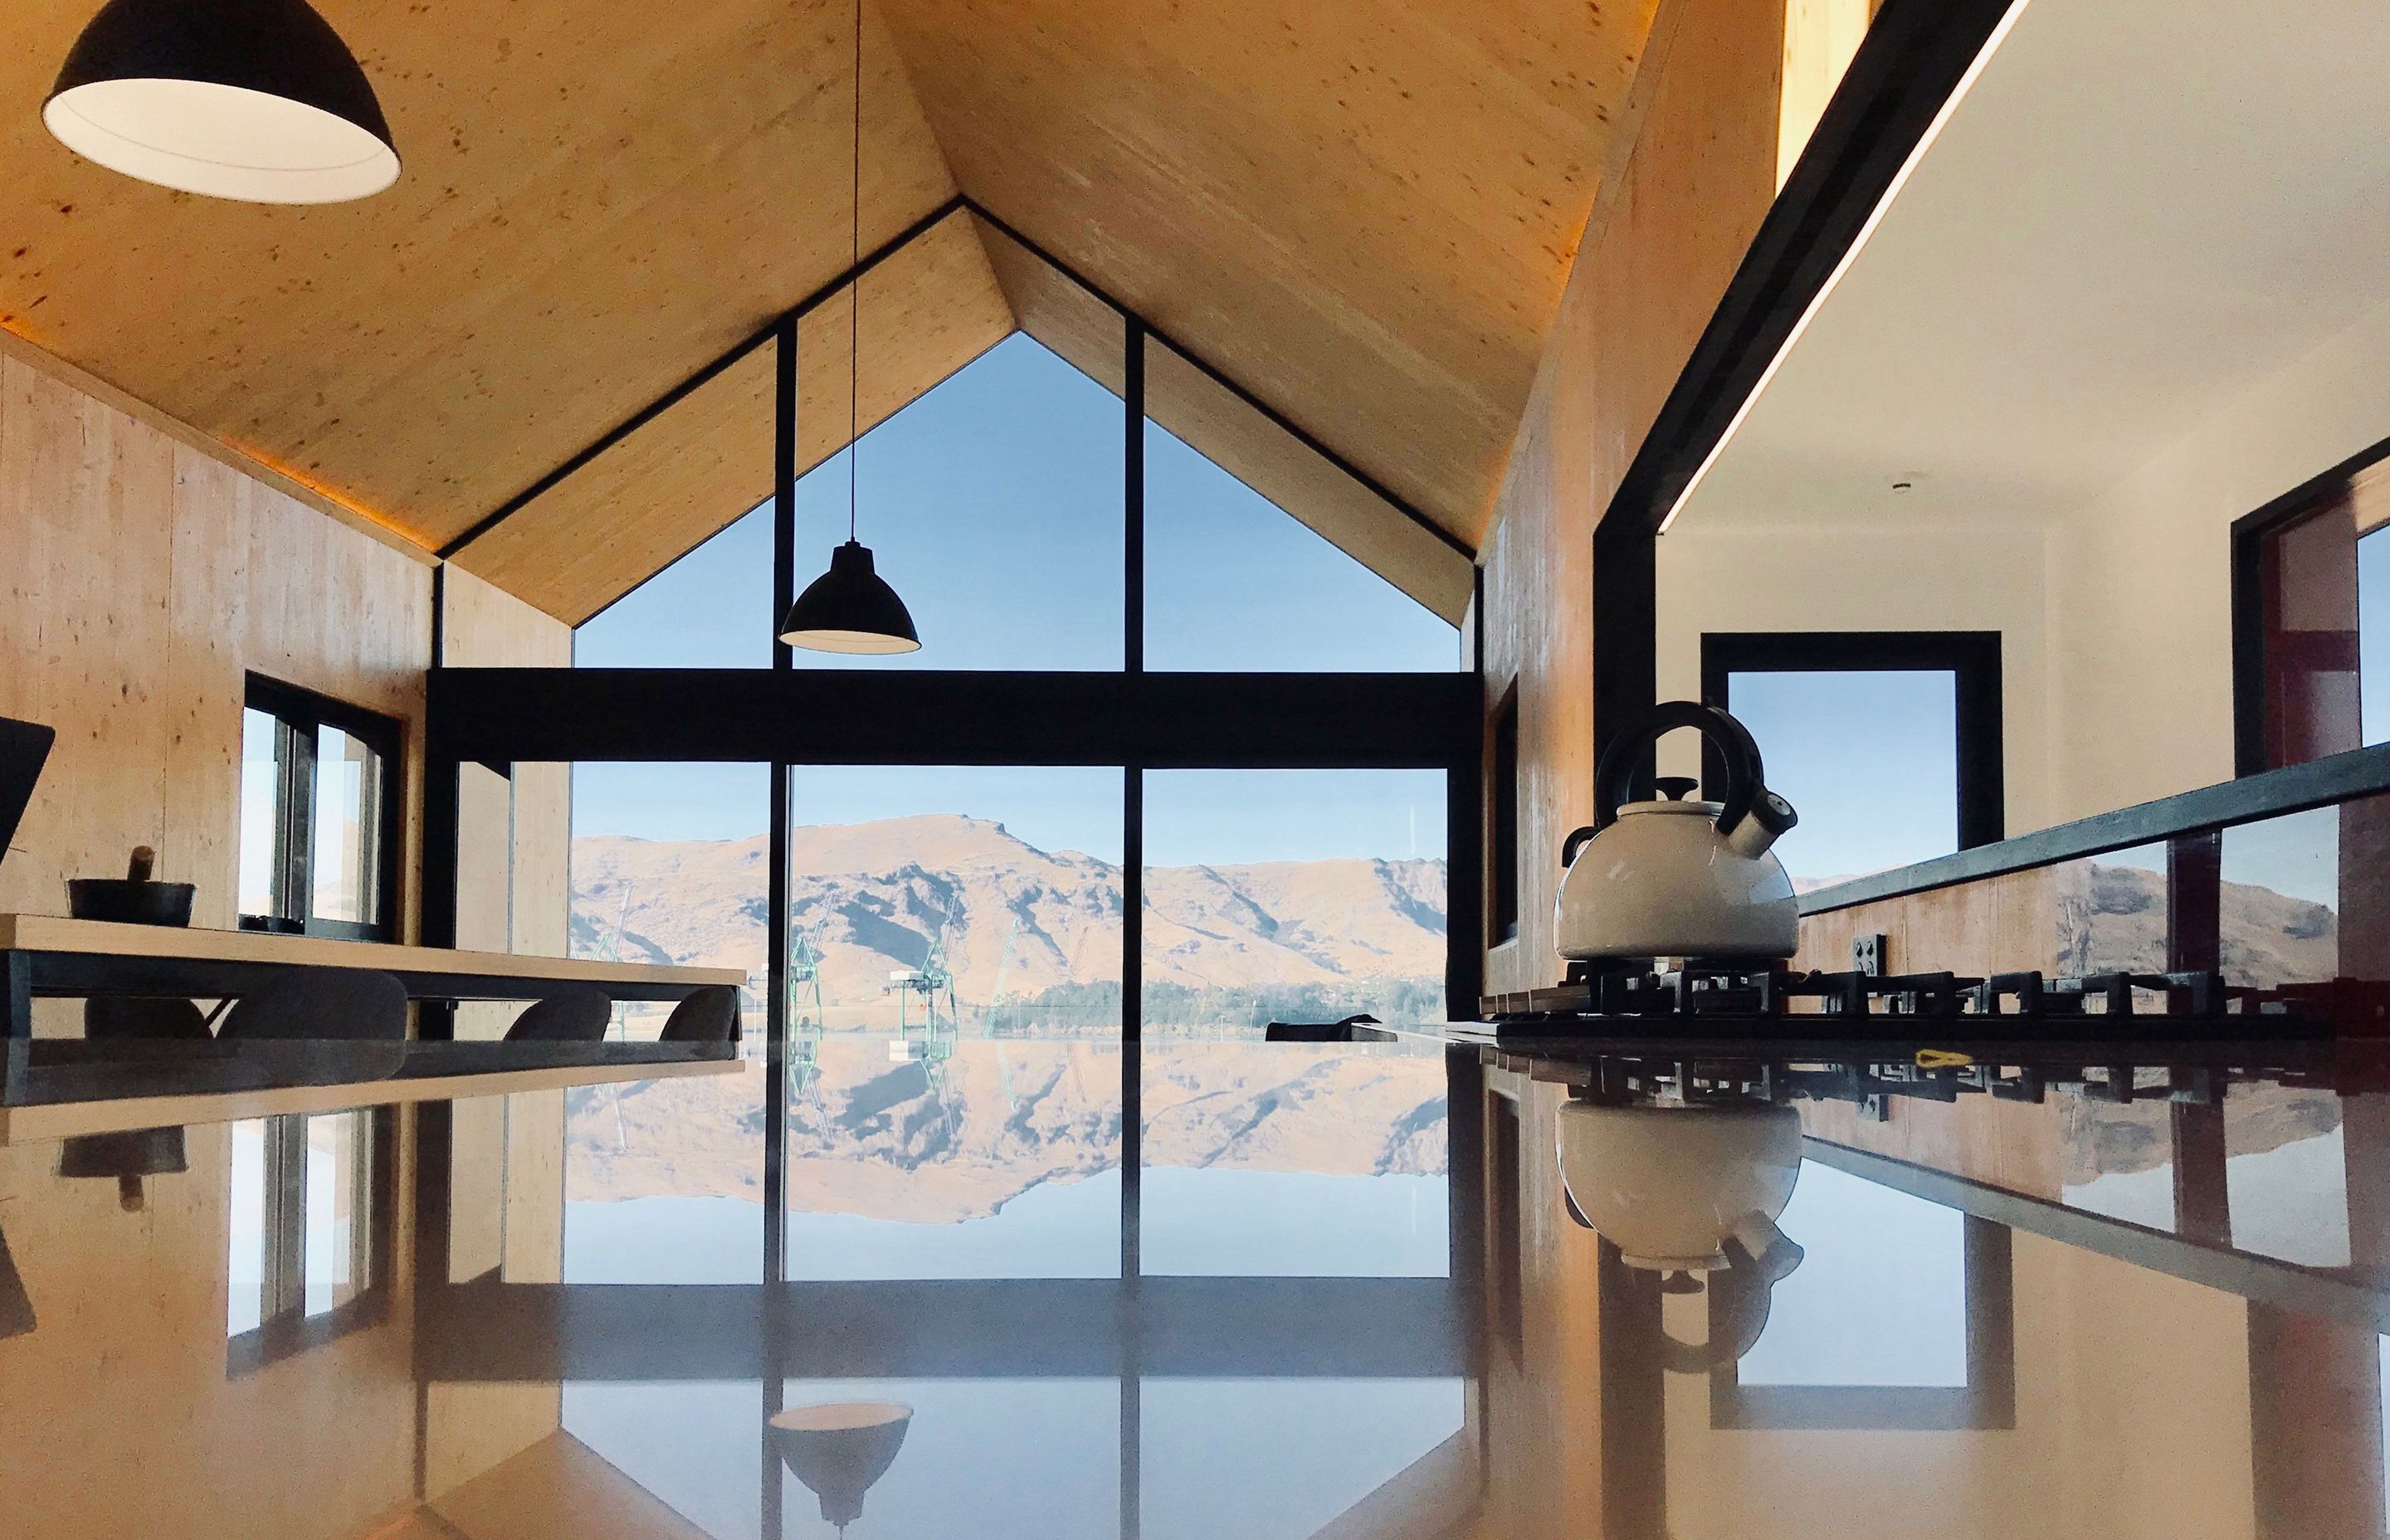 Julie Villard of Bob Burnett Architecture's small 53m² Boat Shed home in Lyttleton has a 9 Homestar rating, and is constructed in CLT with steel portals, wood fibre insulation, rain water harvesting and energy consumption at 36.78 kWh/Y/m².